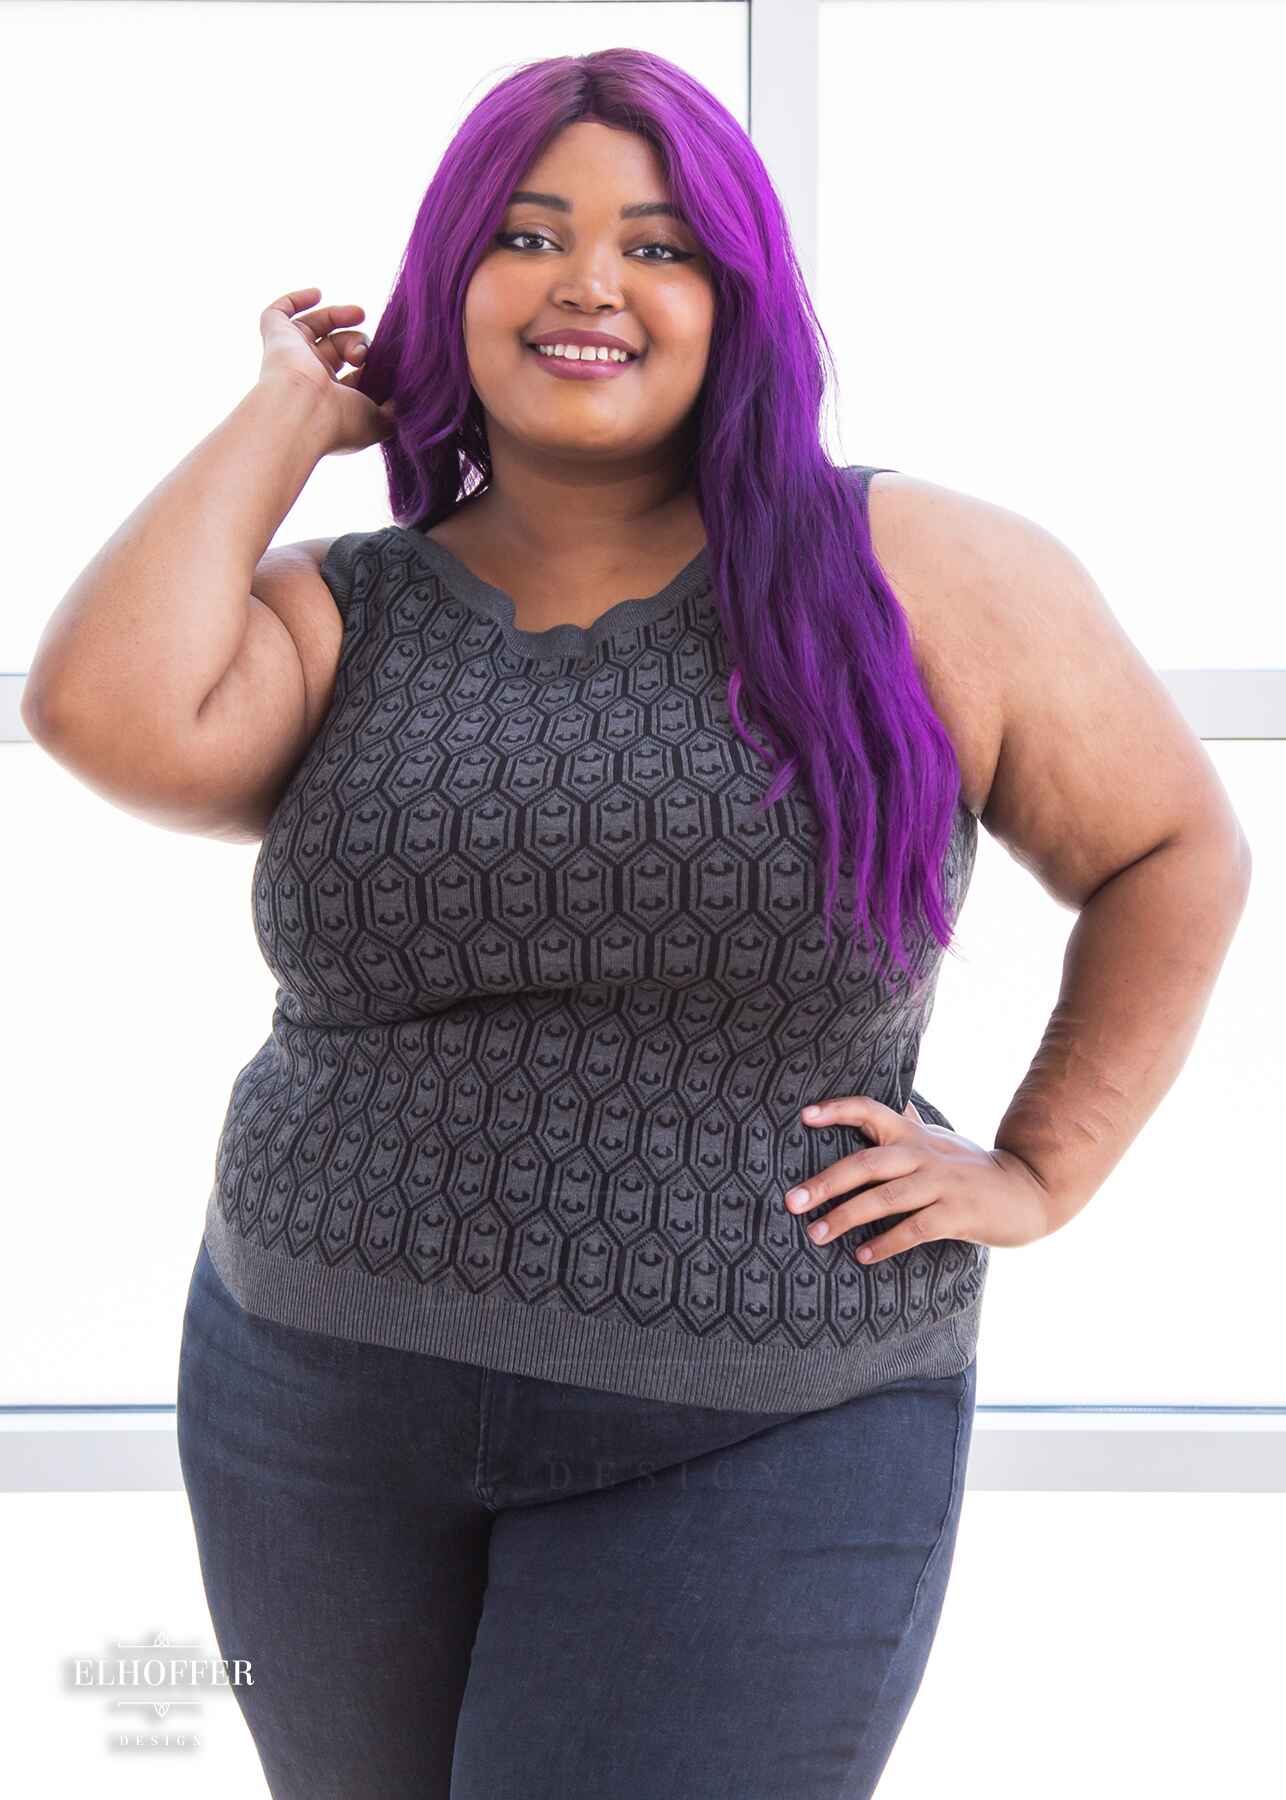 Jade, a light brown skinned 2xl model with long wavy purple hair, is smiling while wearing a knit sleeveless top with a boatneck and an armor plated design